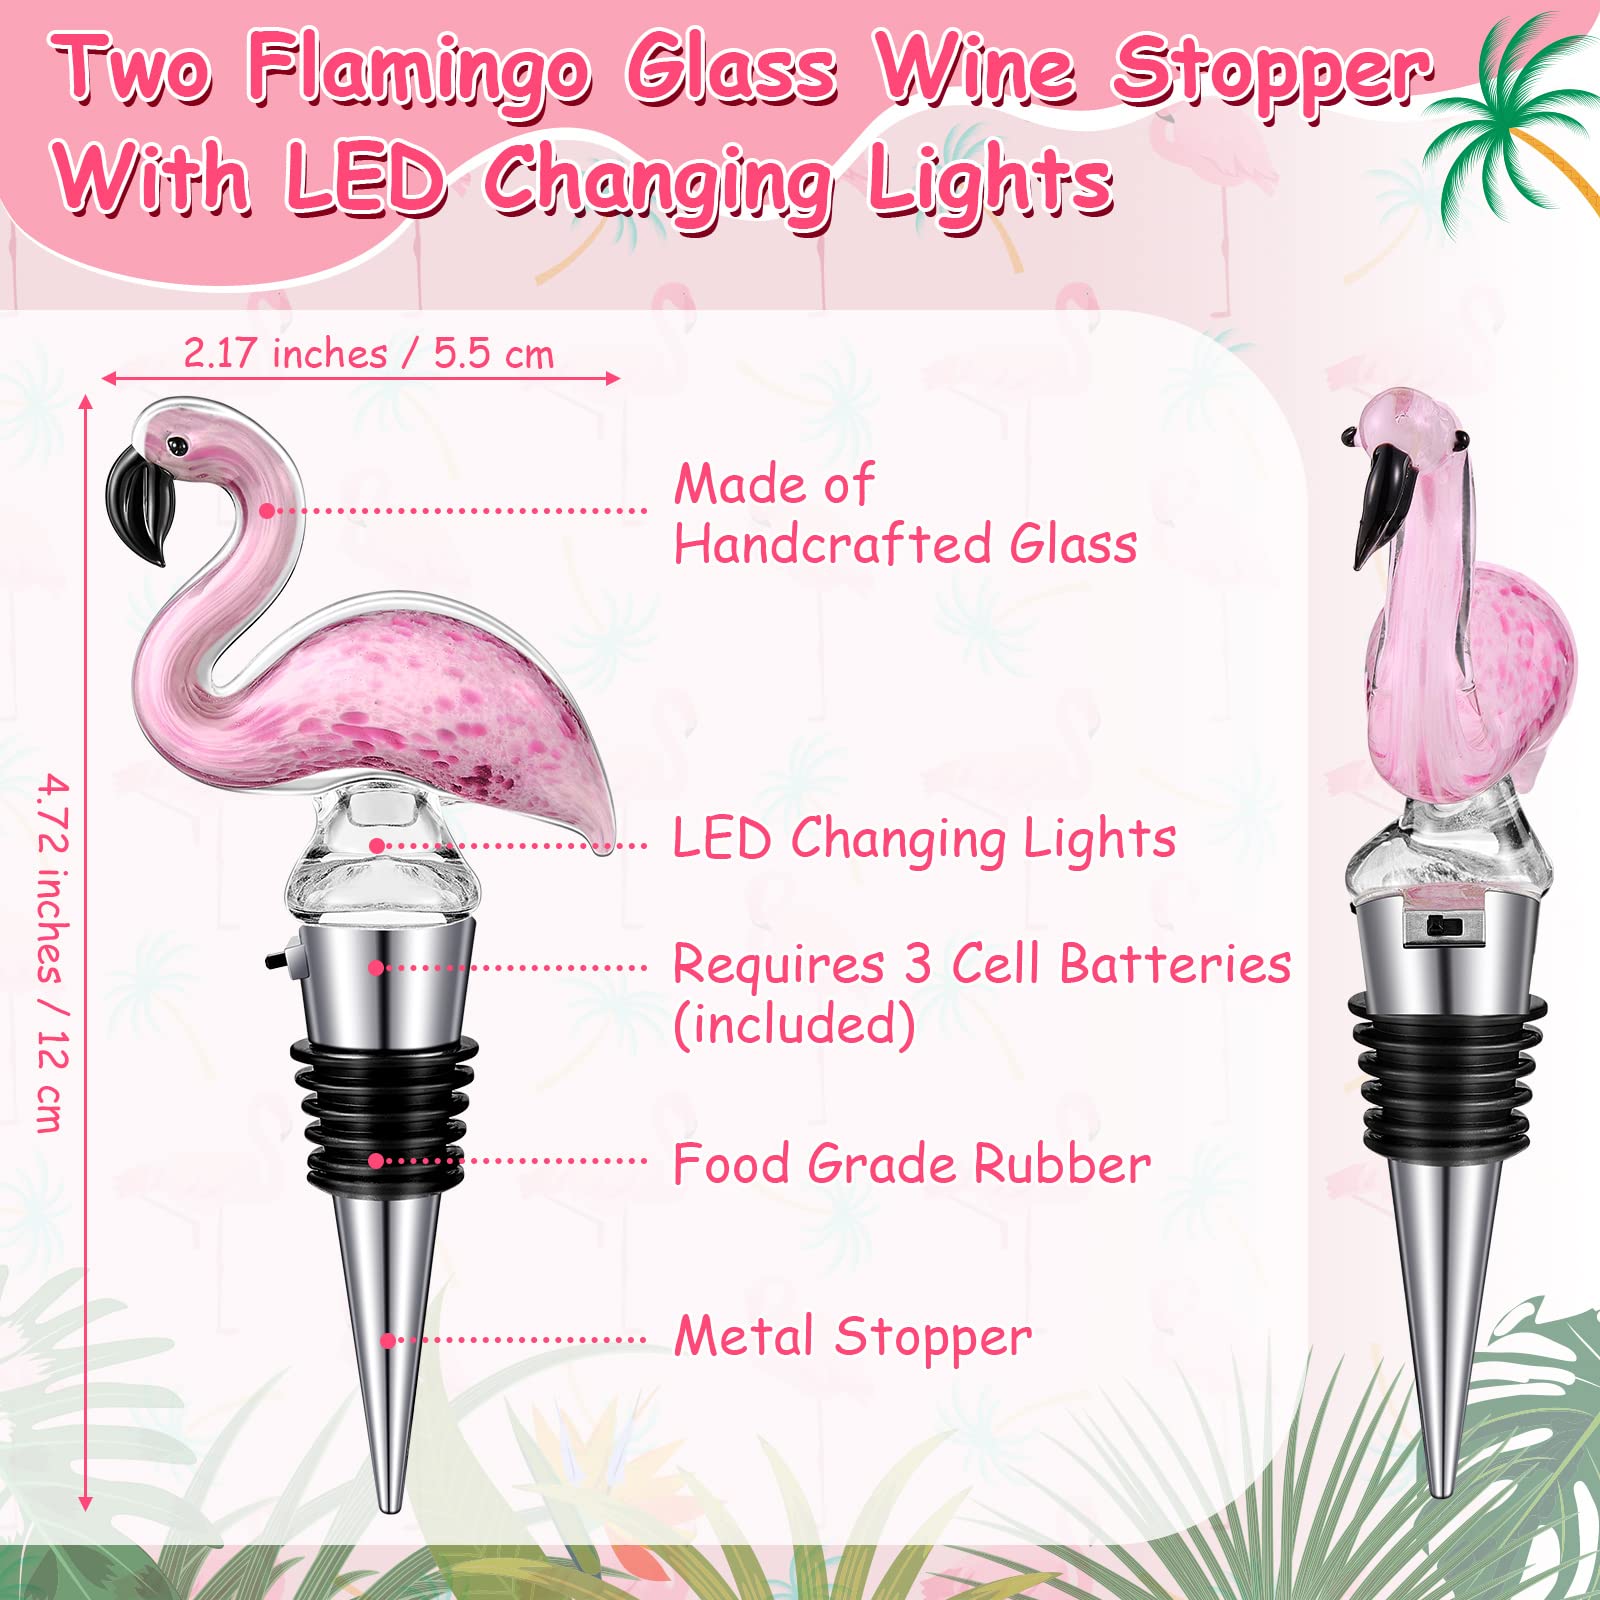 2 Pcs Glass Flamingo Wine Bottle Stopper Flamingo Wine Stopper with LED Changing Lights Cute Animal Wine Stopper Flamingo Gifts for Women Men Wine Accessories